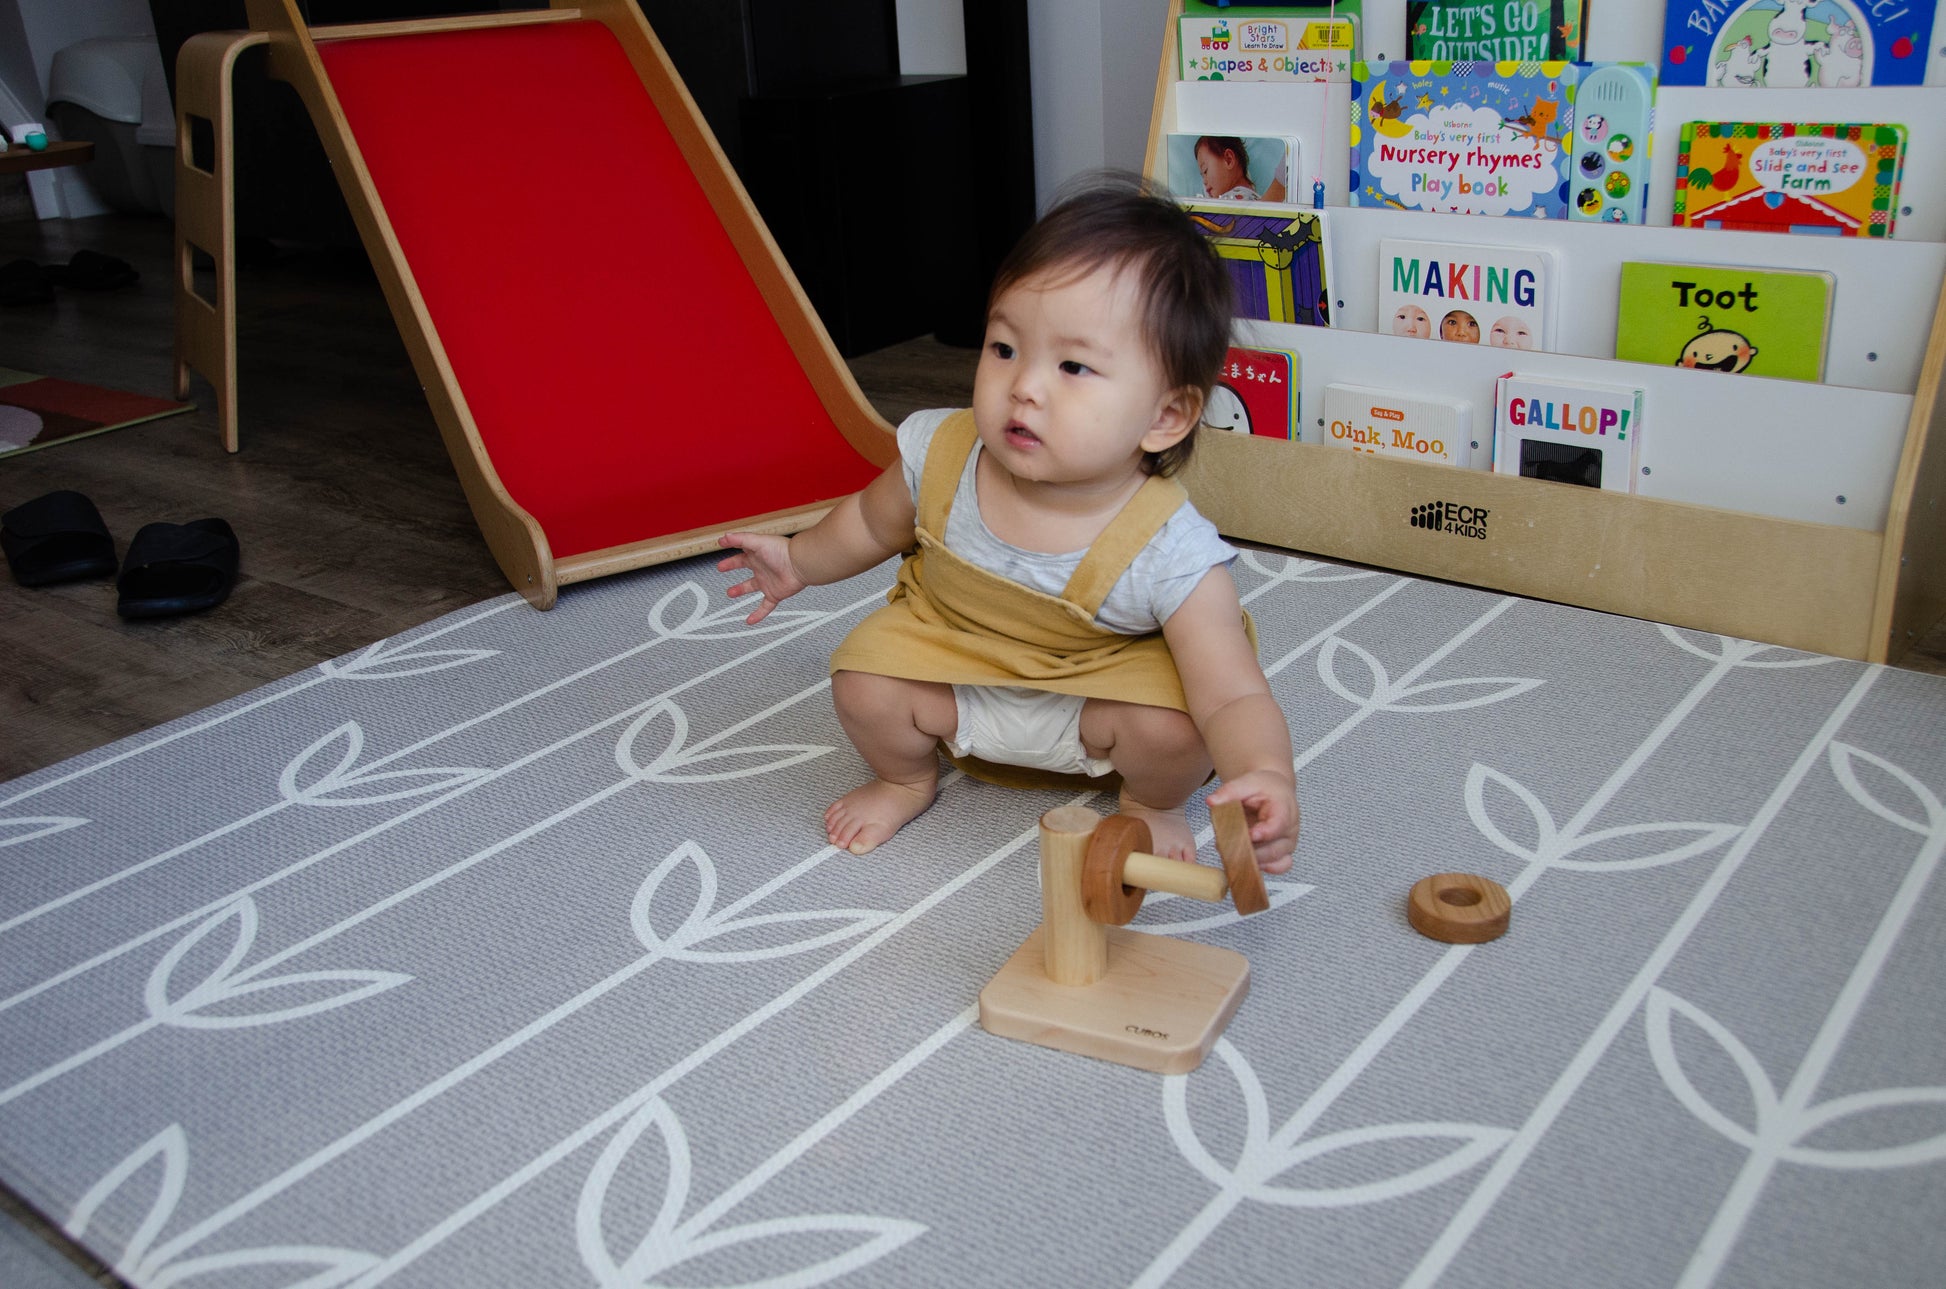 Sweet baby girl successfully putting the second wooden ring on the Cubos Horizontal Dowel Rings Stacker, celebrating her progress and growing confidence in stacking the rings with each accomplishment. Her playful exploration and motor skills development continue to shine during this delightful playtime.